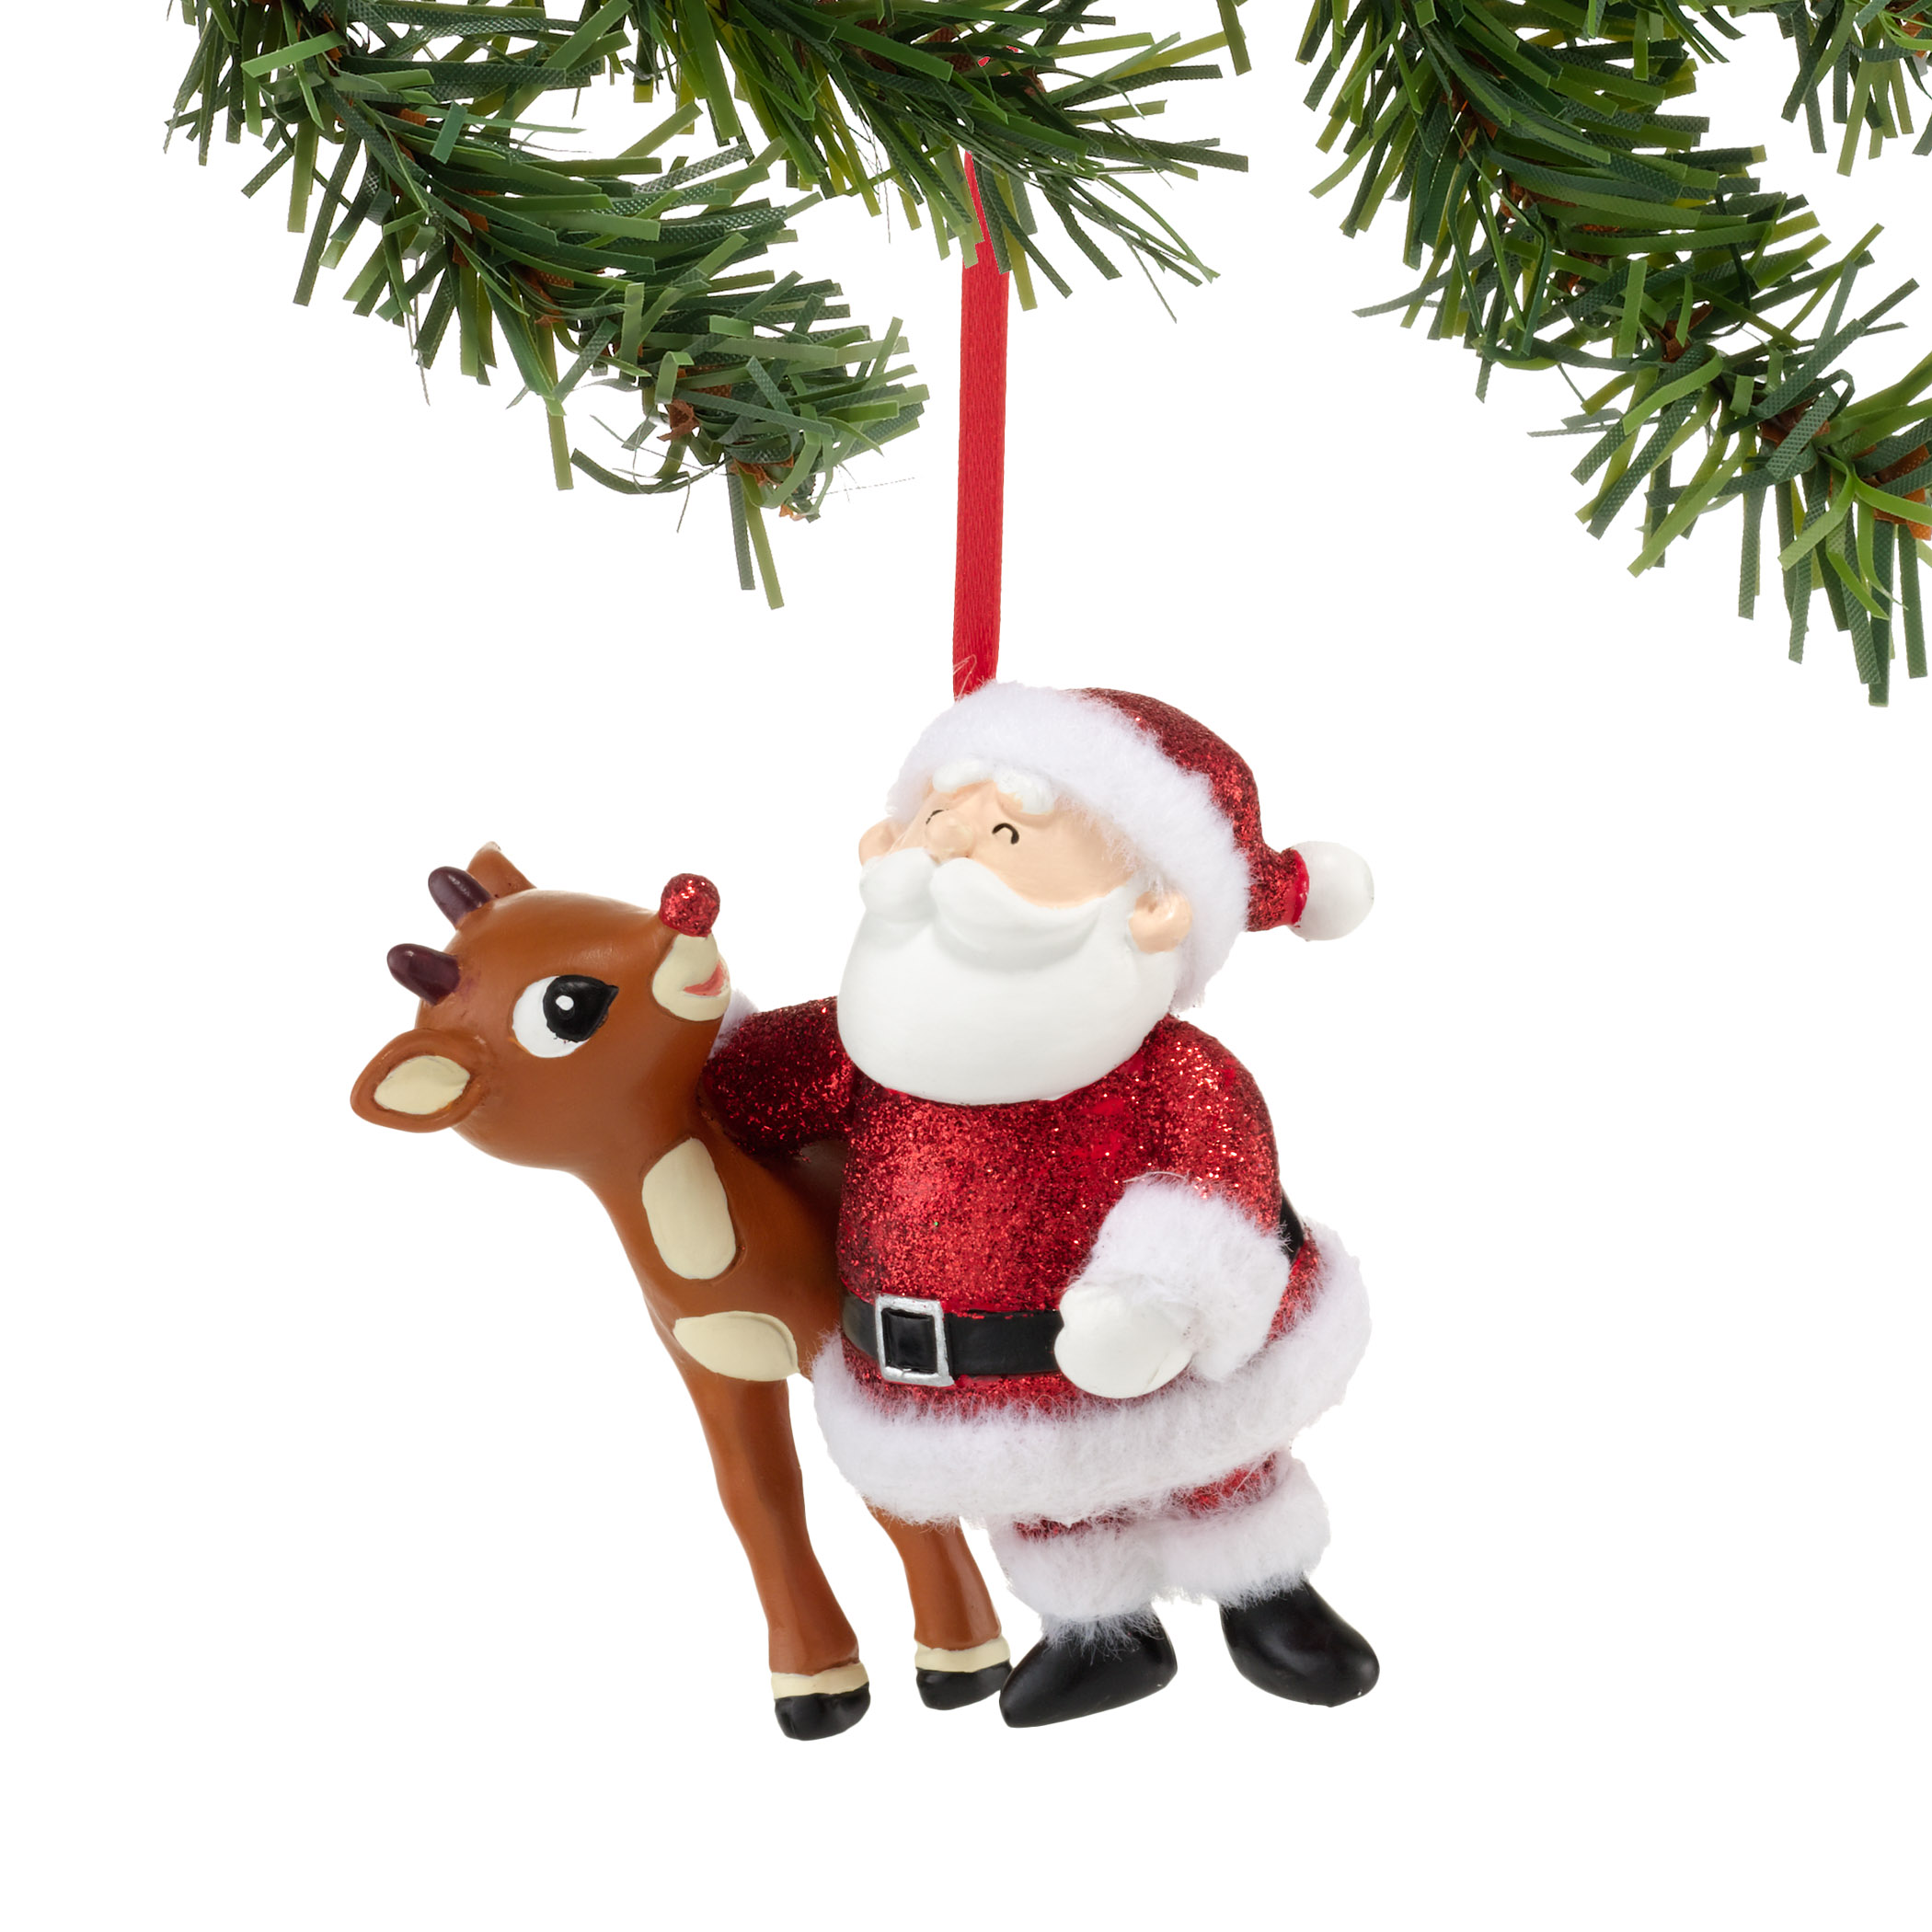 Dept 56 Rudolph the Red Nose Reindeer And Santa Christmas Ornament